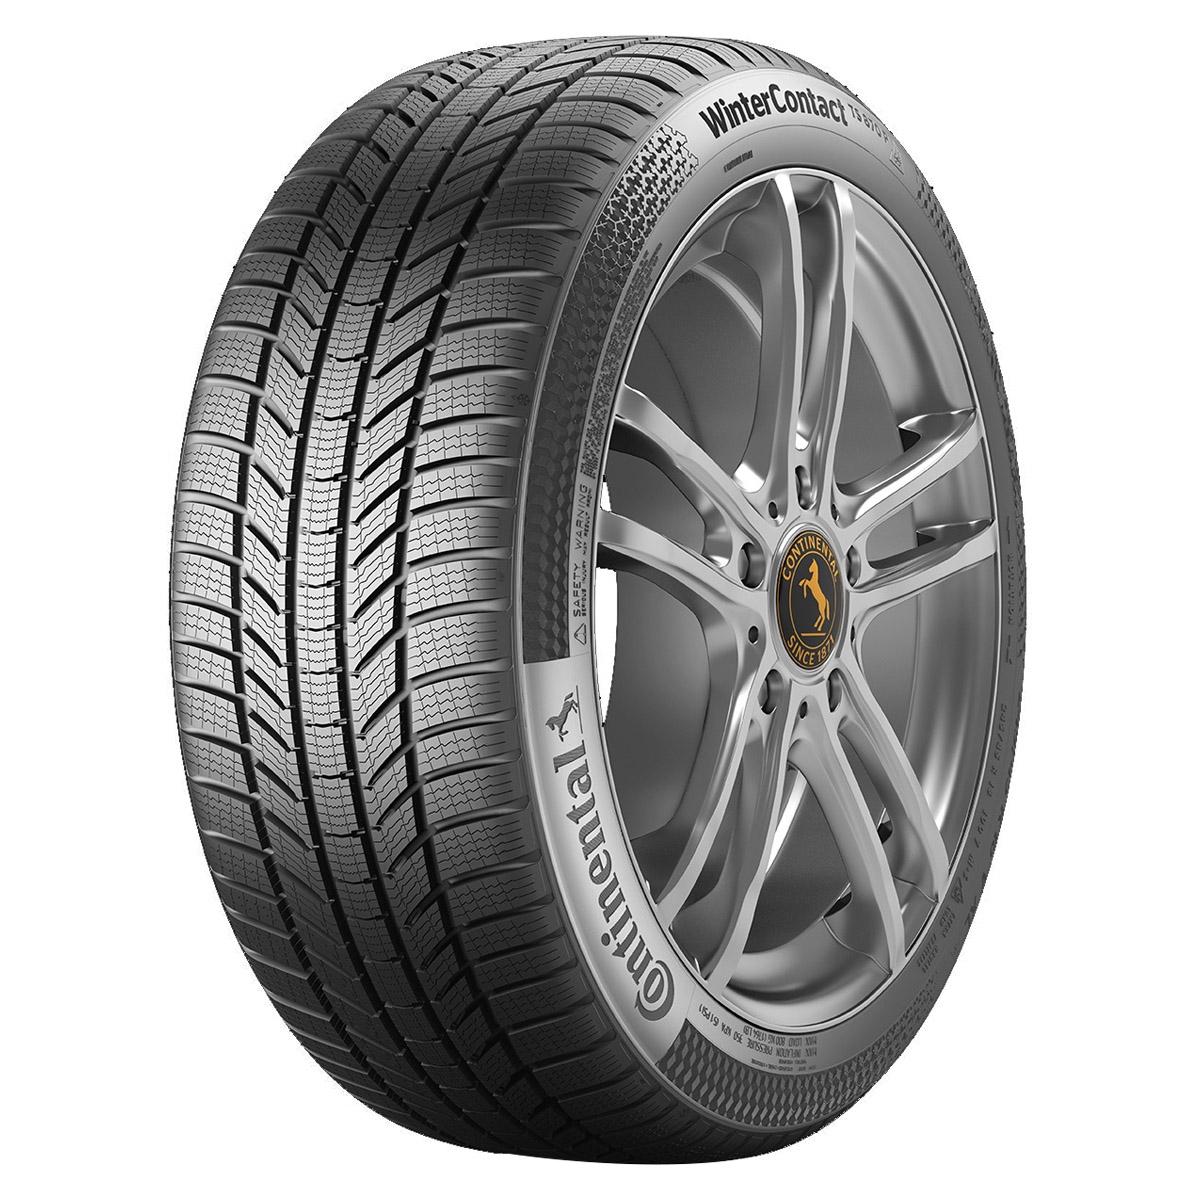 Anvelope iarna CONTINENTAL WINTER CONTACT TS870 P FR 235/65 R17 108H